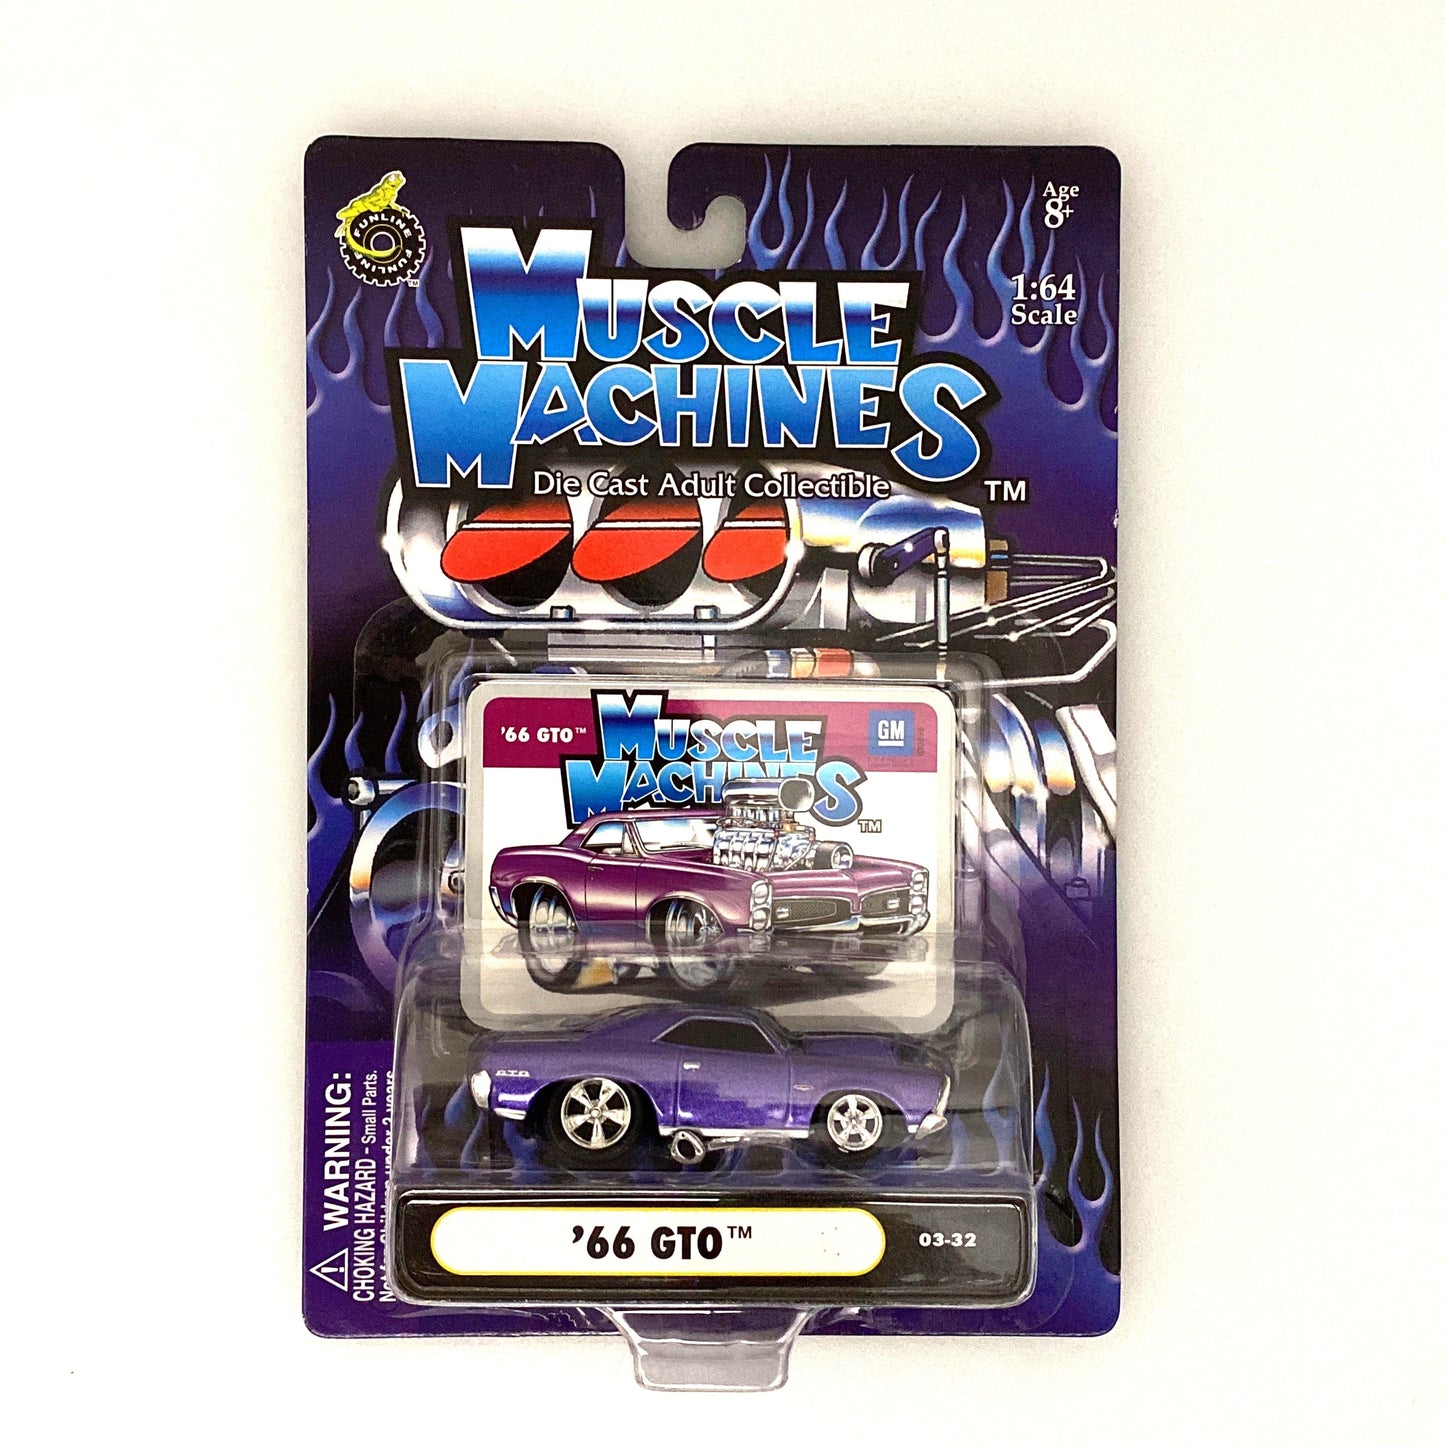 Muscle Machines '66 GTO Purple Diecast Collectible Car 1:64 Scale Model #03-32